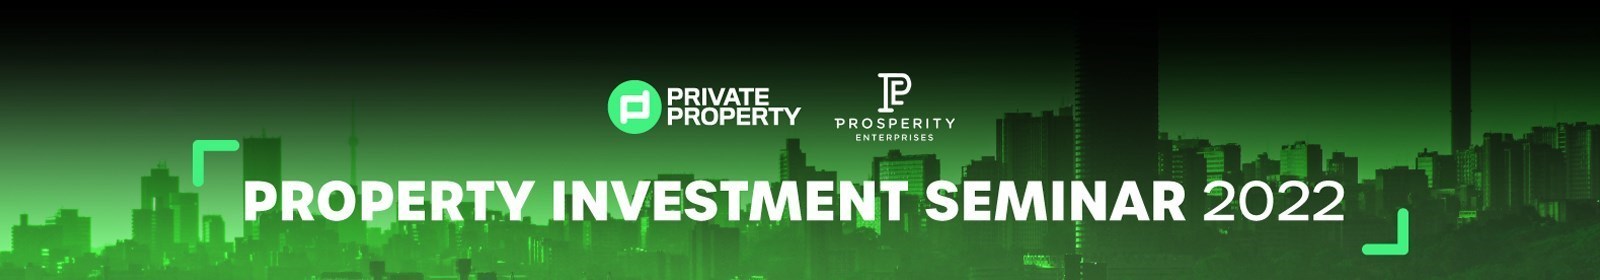 Property Investment Seminar makes a return to Bloemfontein